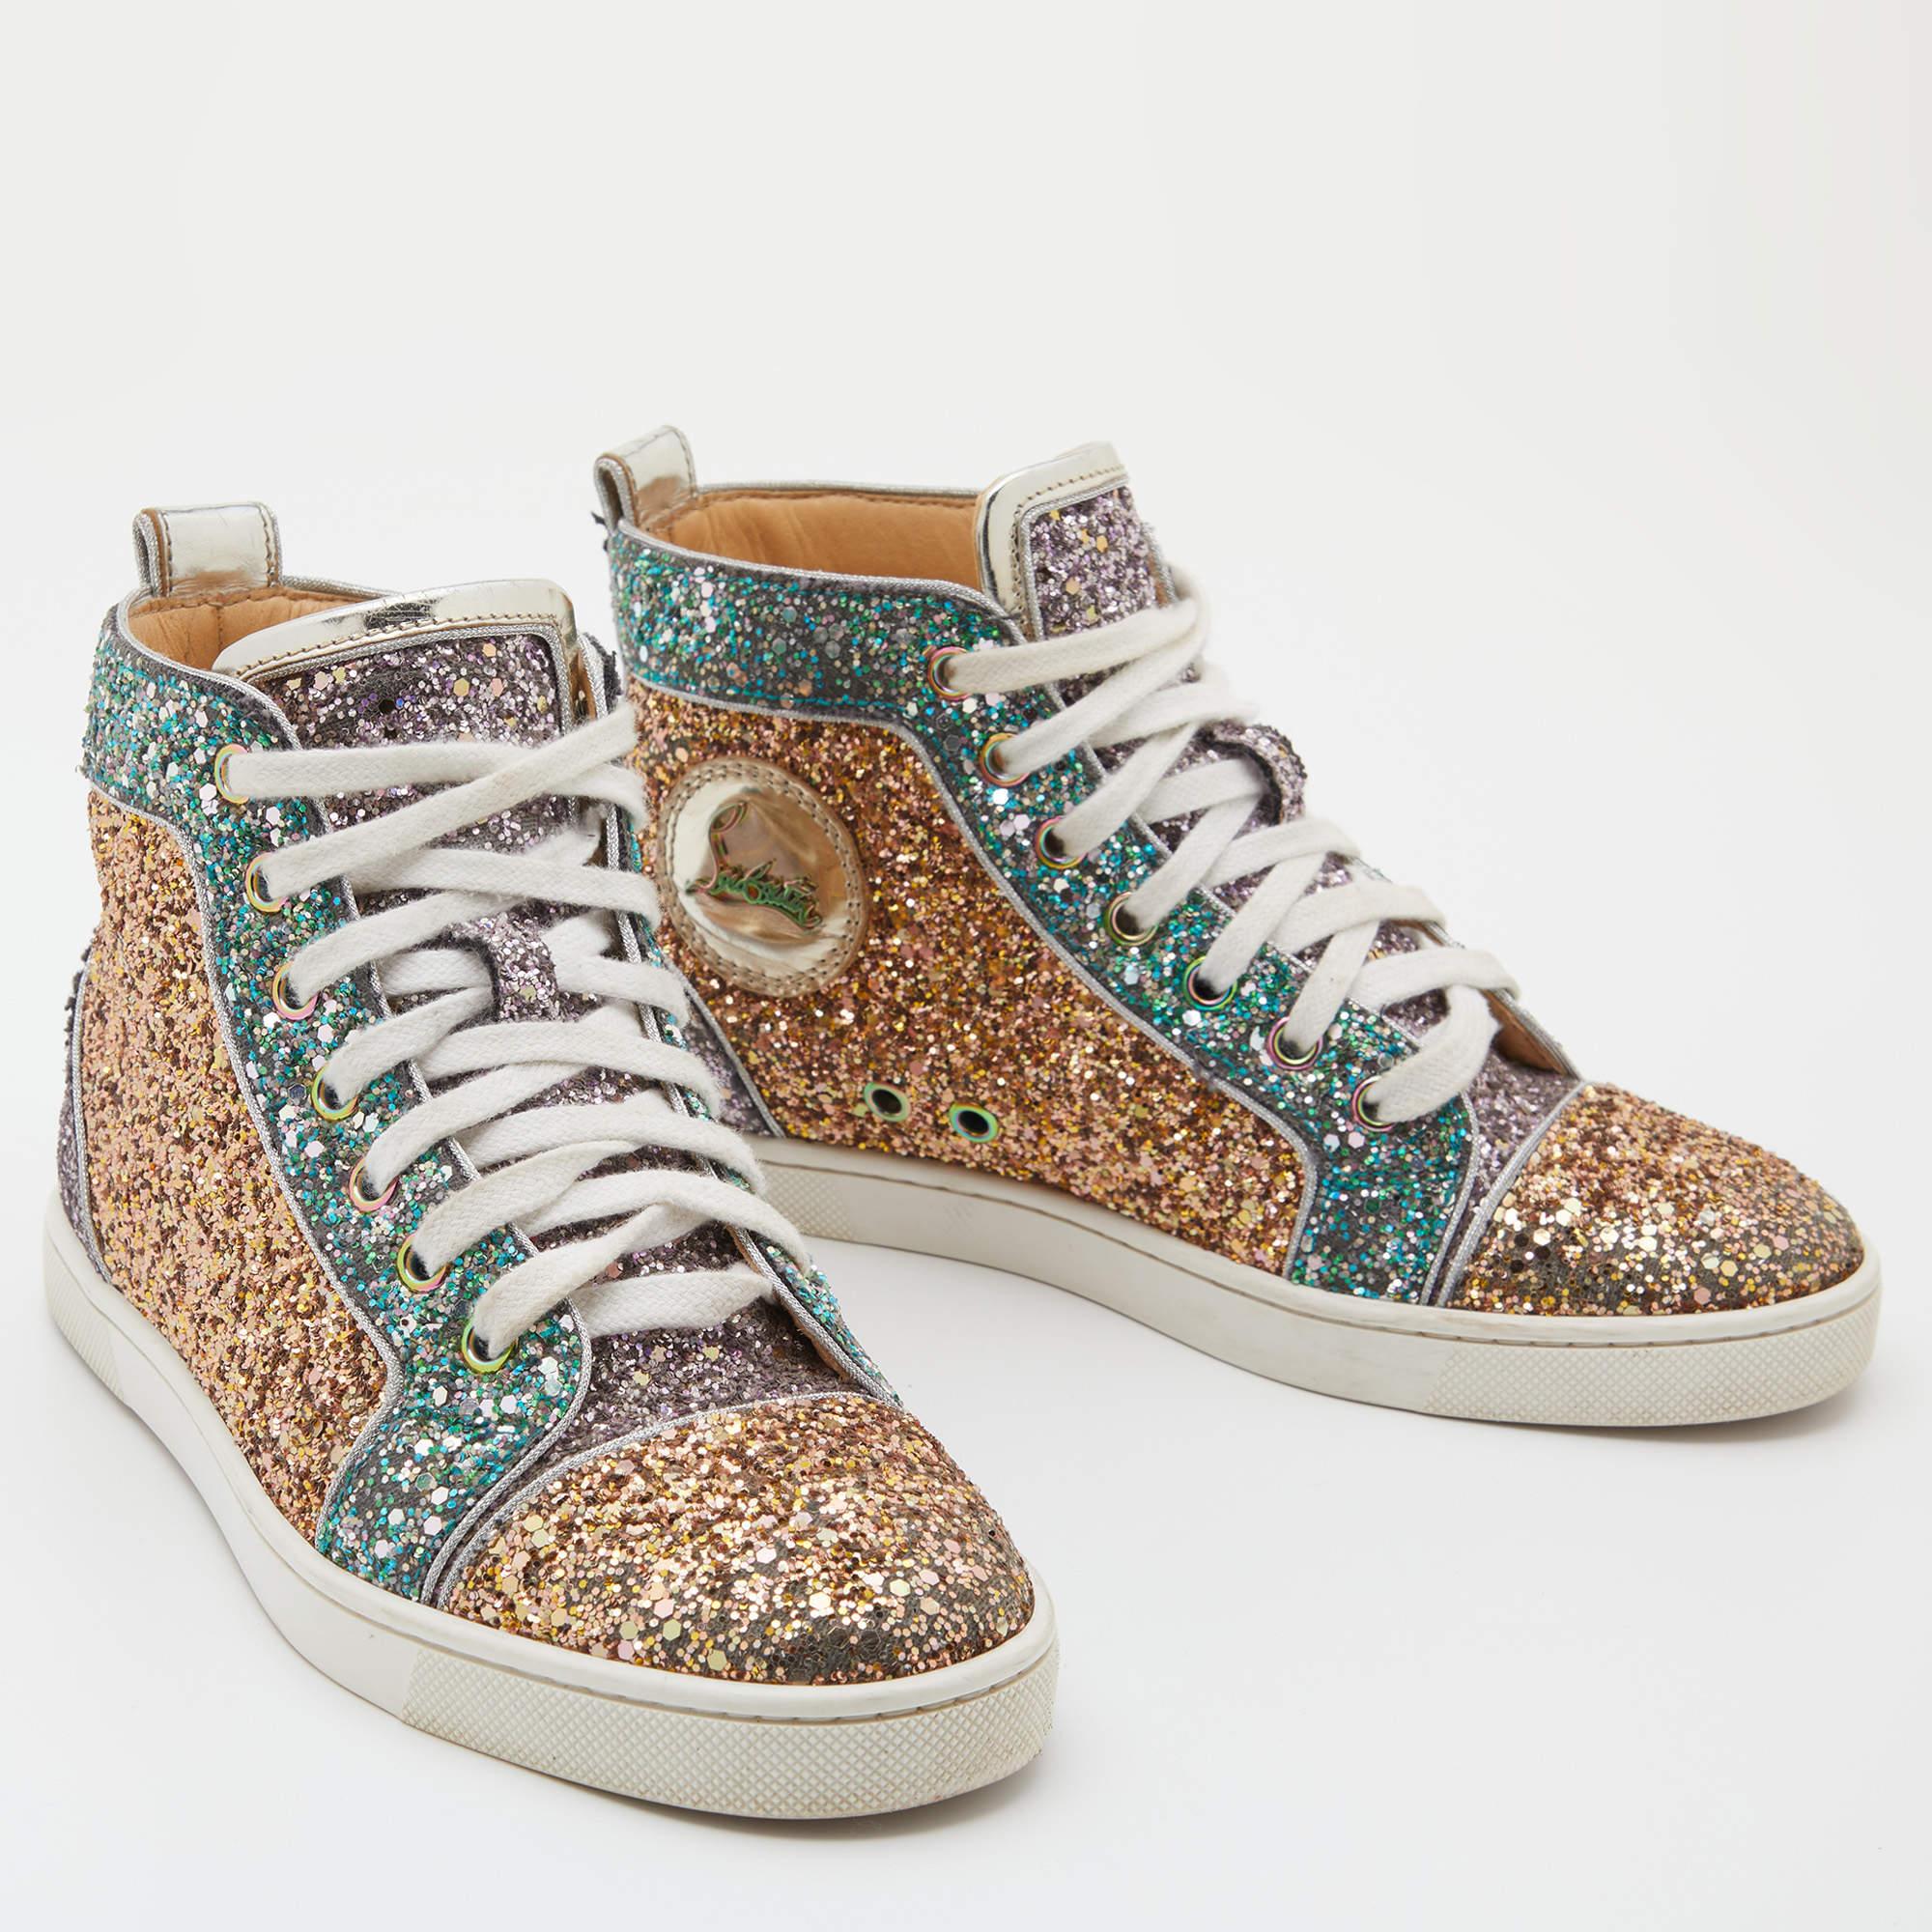 Pull off a stylish look with class in this pair of Bip Bip sneakers from Christian Louboutin. They feature a shimmery glitter body sculpted in a high-top silhouette. The sparkly sneakers have lace-up fronts, round toes, and the iconic red soles.

